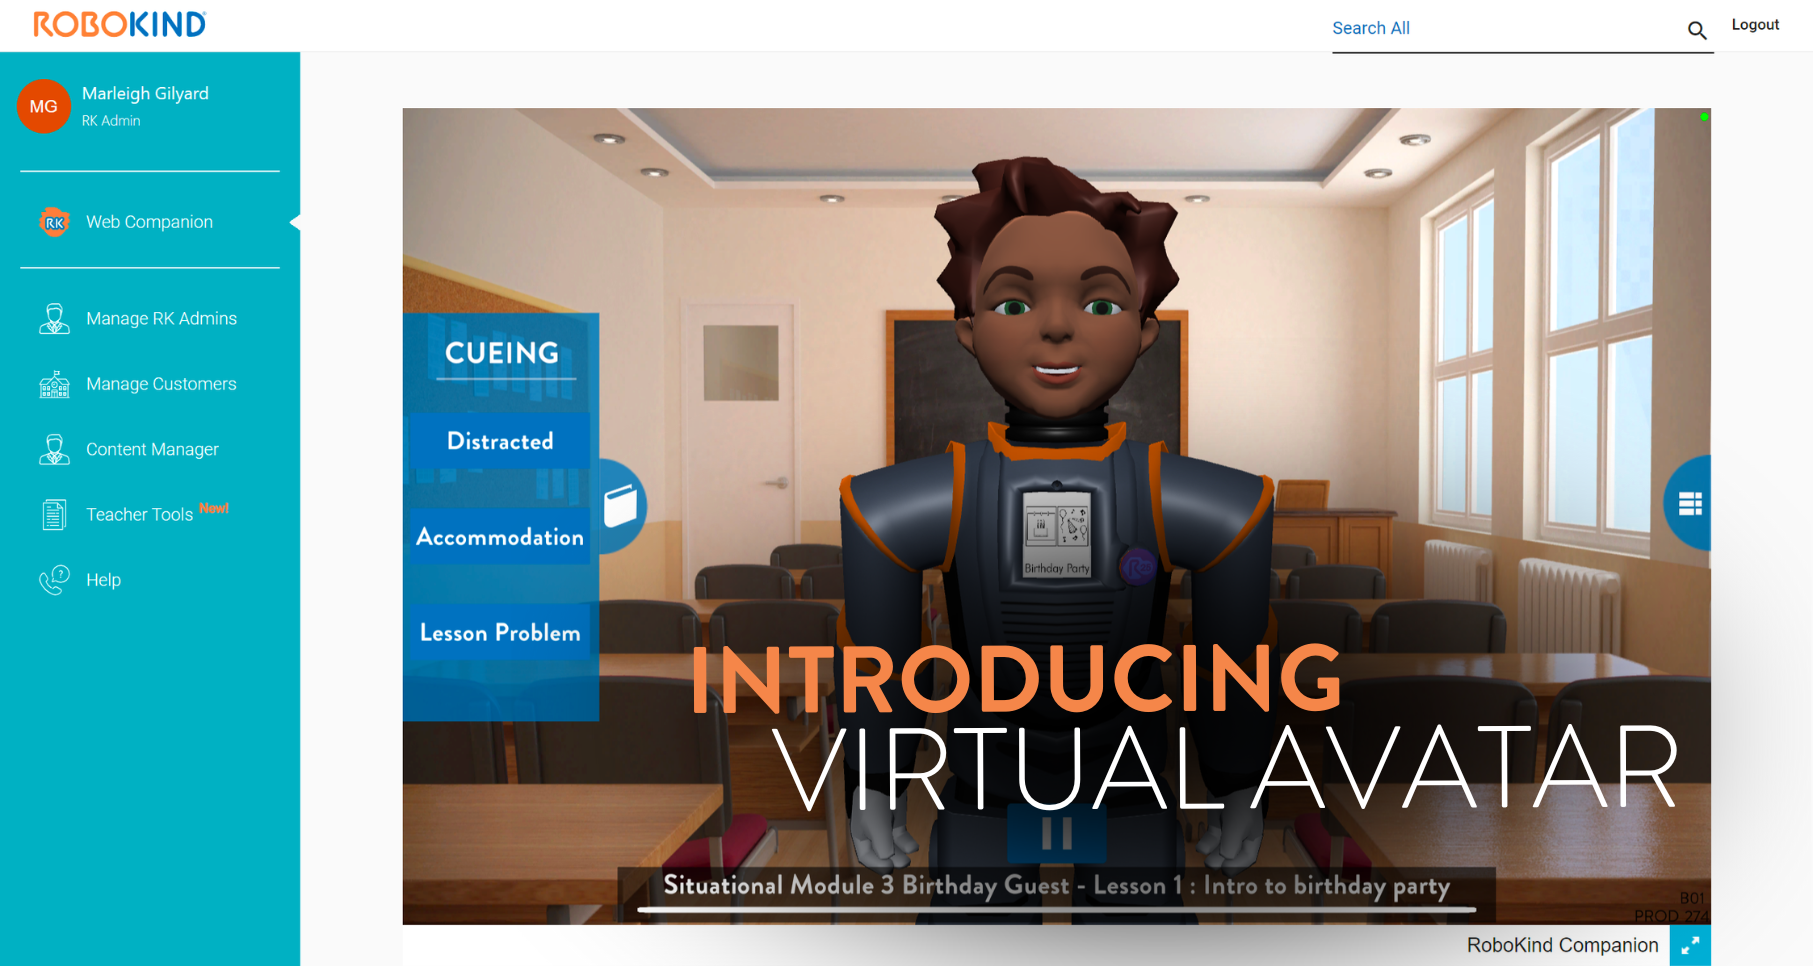 screenshot of RoboKind's virtual avatar Carver with text that says 